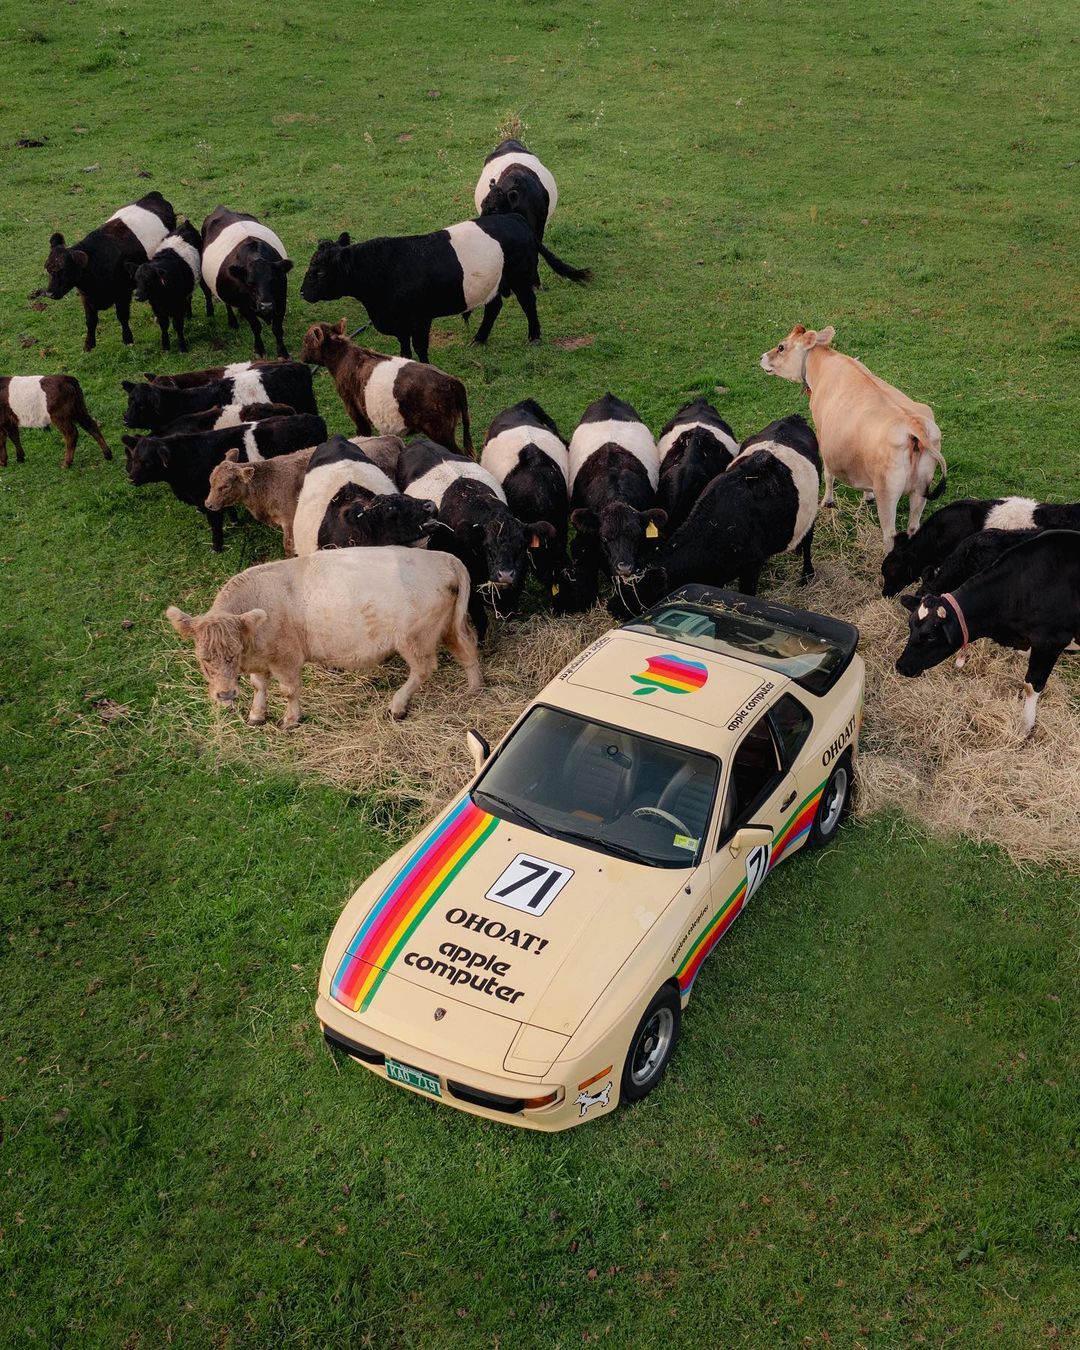 A Porsche 944 in a field with cows